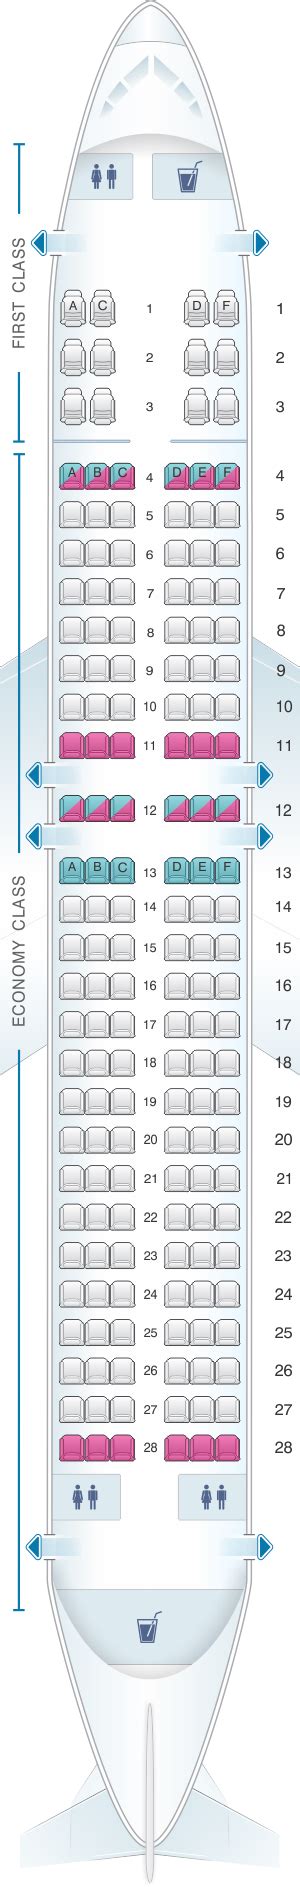 Seat Map Sun Country Airlines Boeing B737 800 162pax